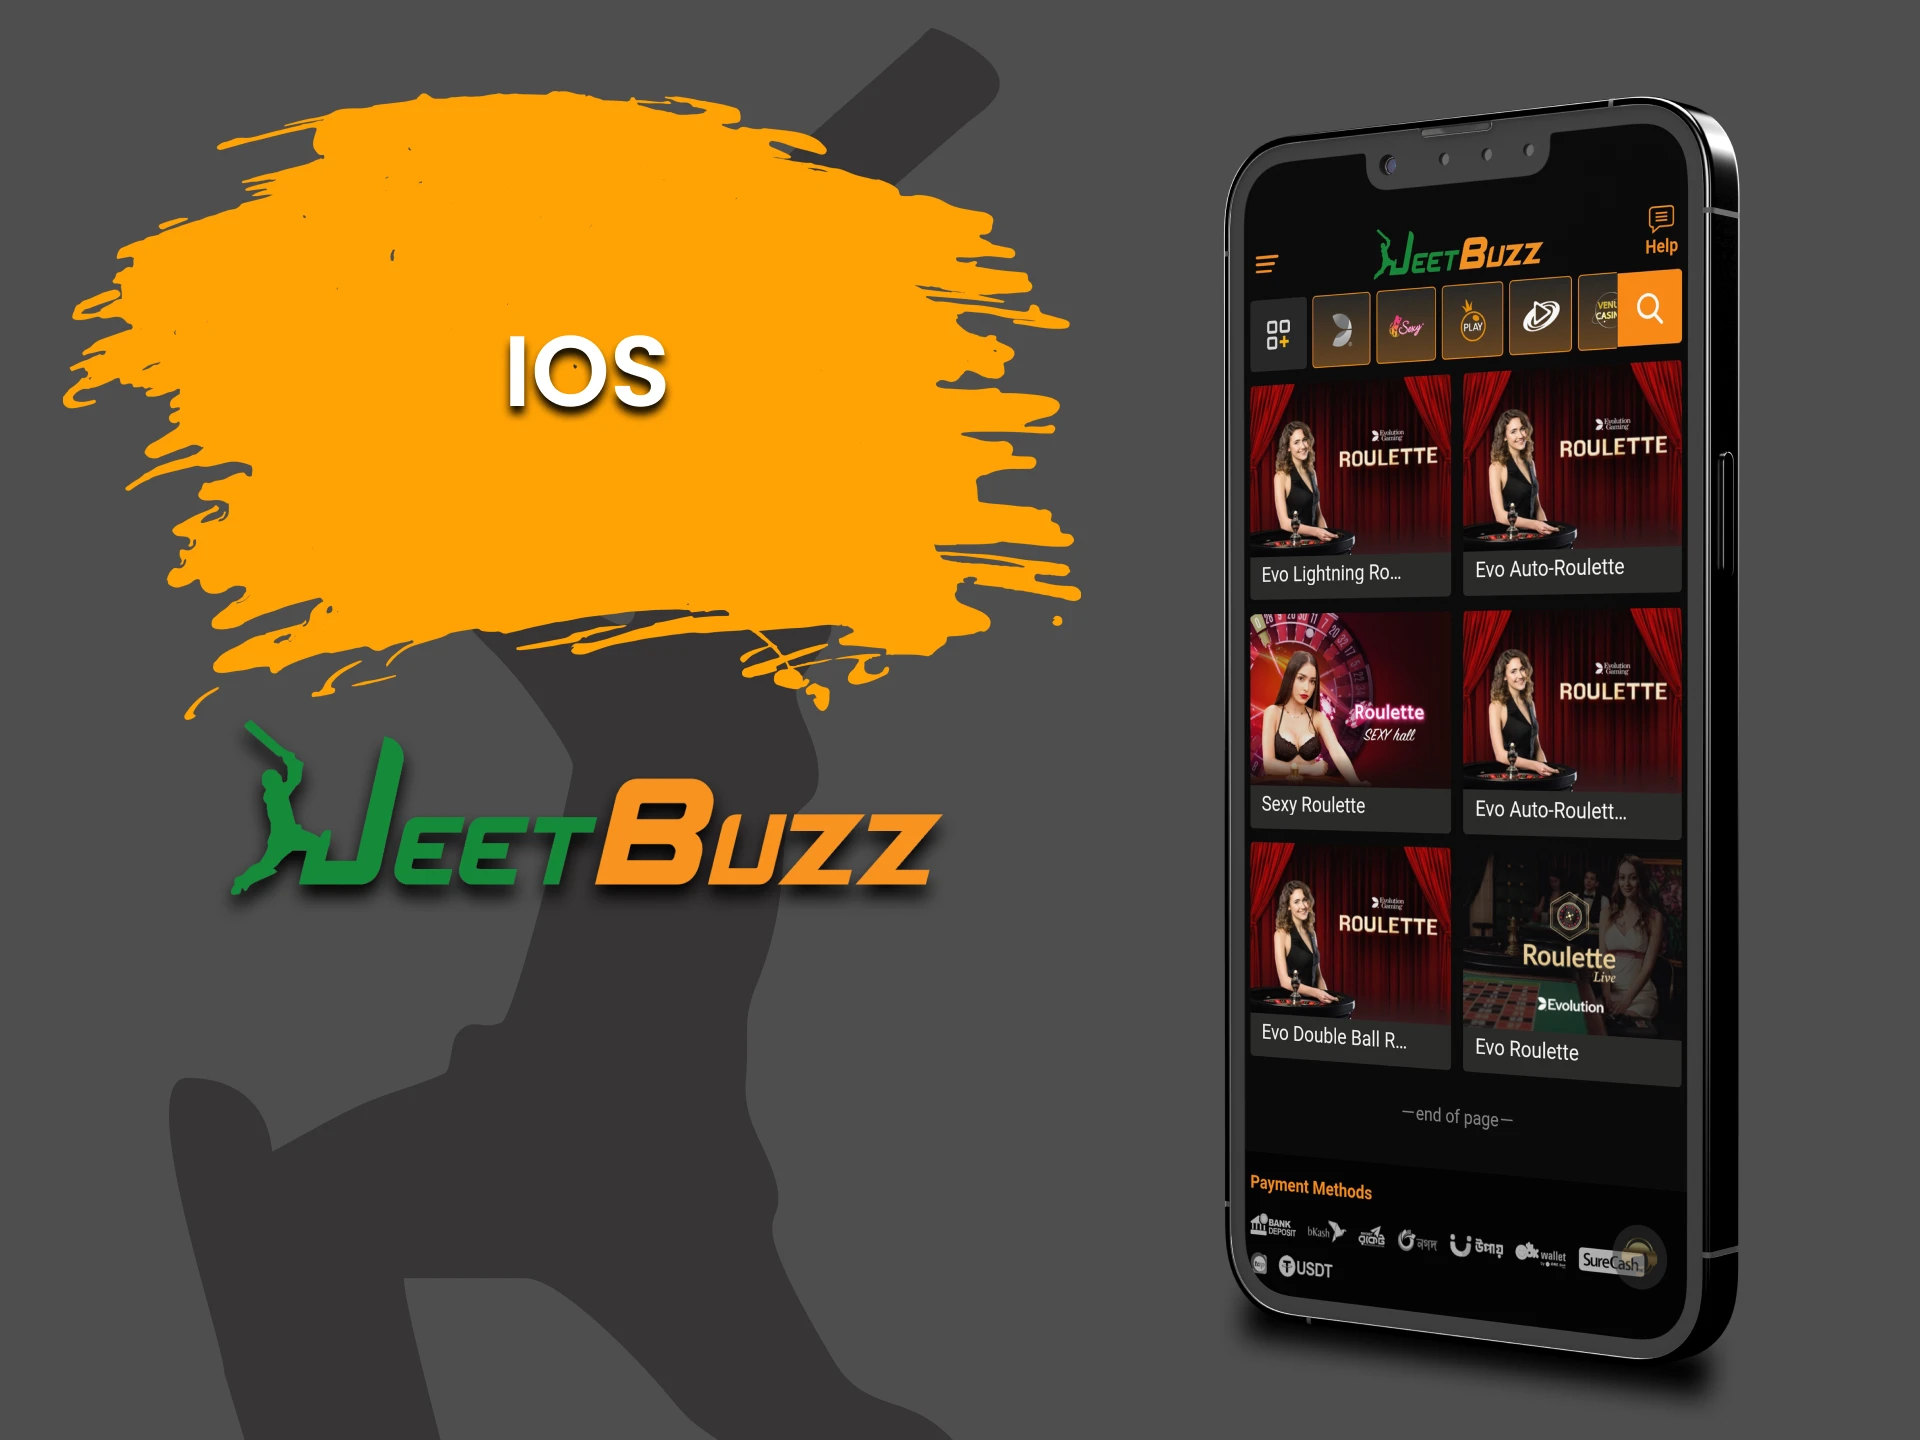 Download the JeetBuzz app to play Roulette on iOS.